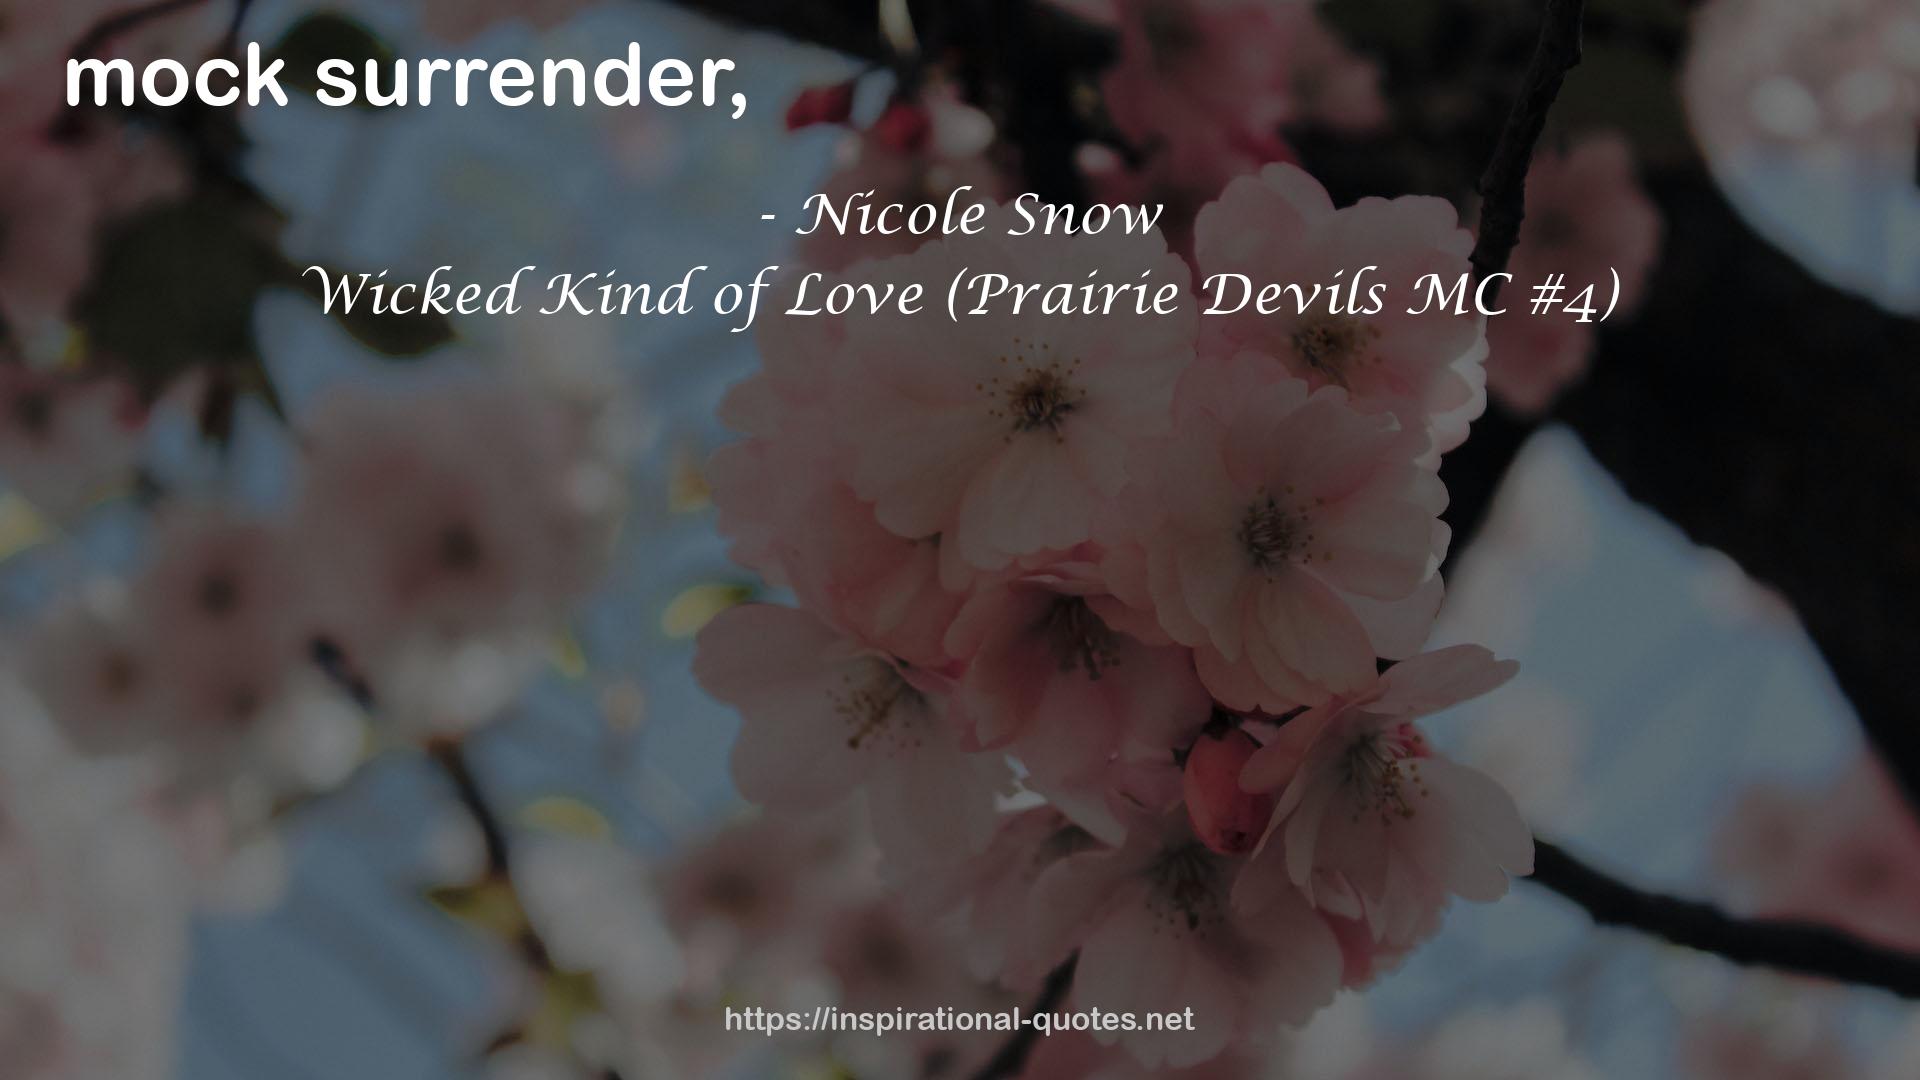 Wicked Kind of Love (Prairie Devils MC #4) QUOTES